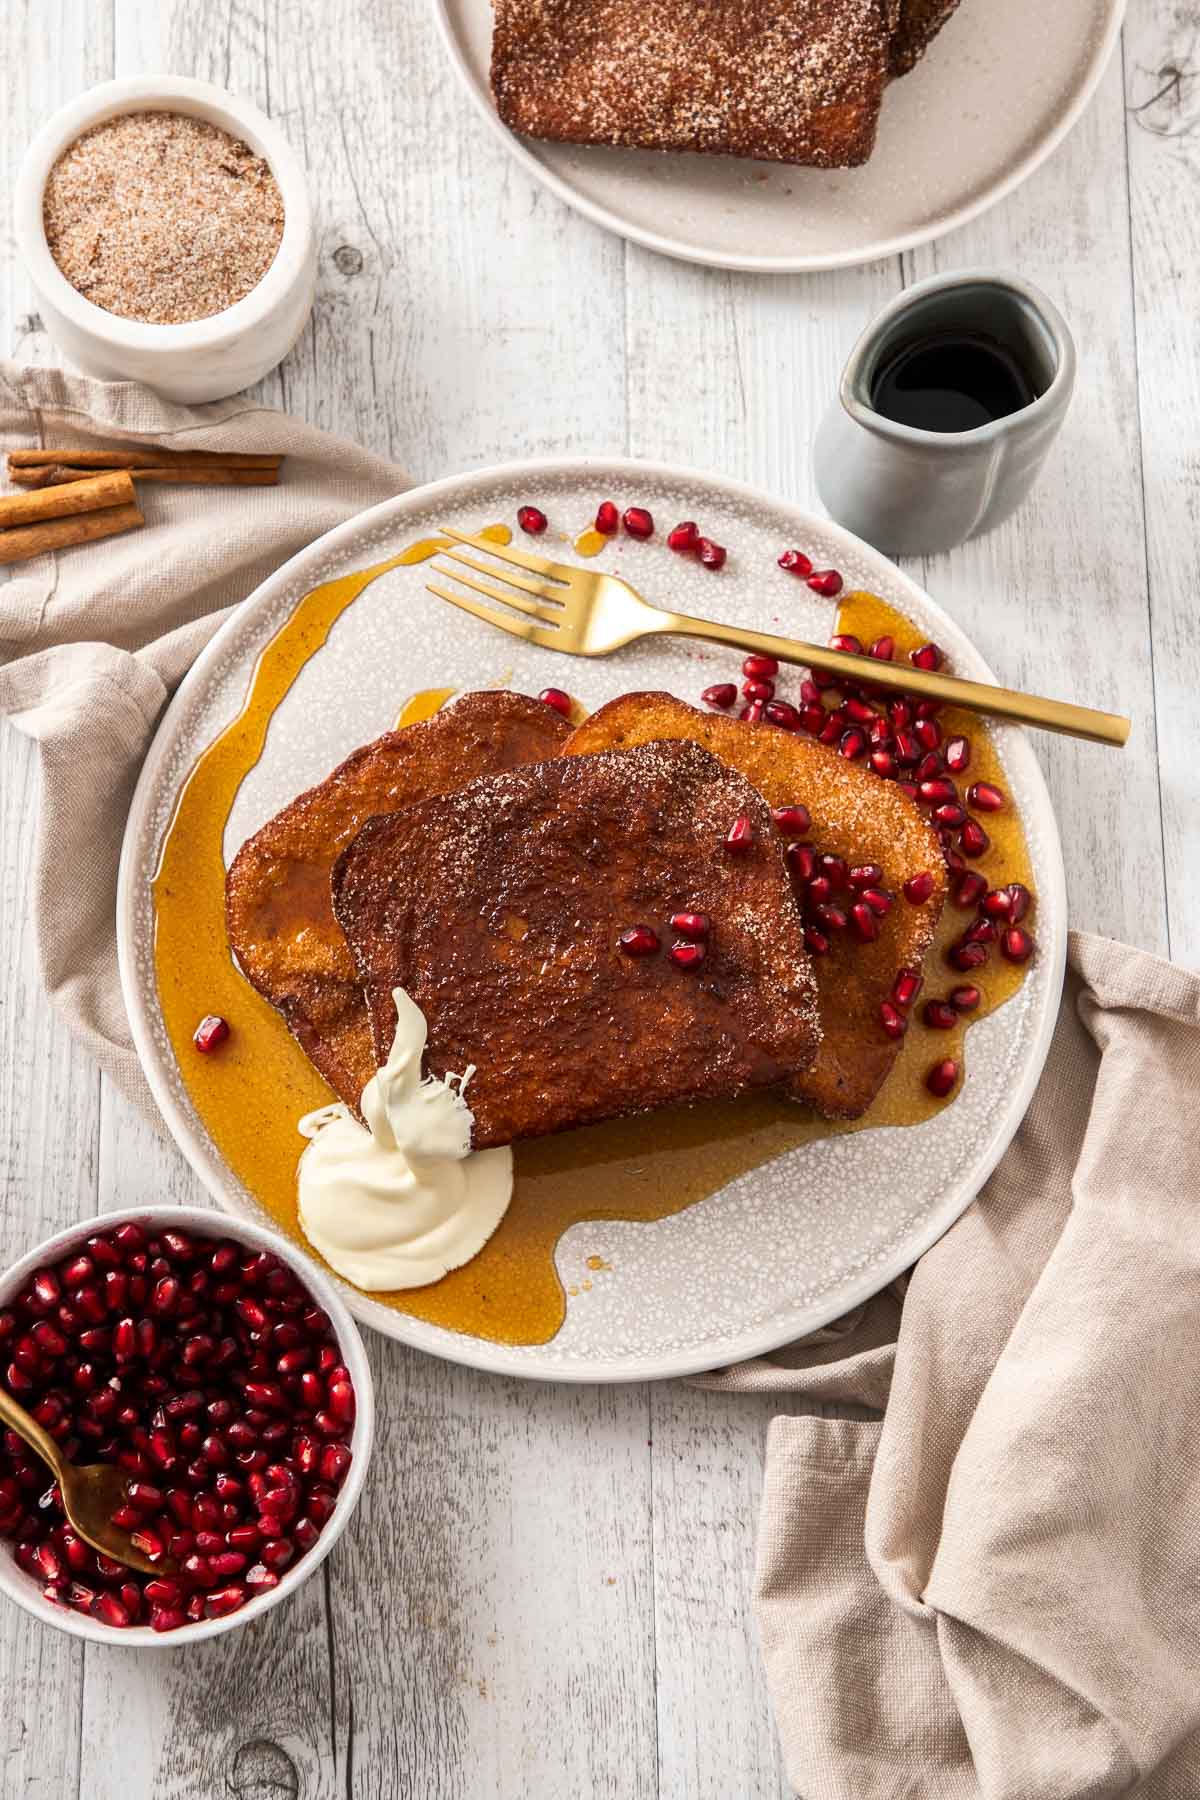 A plate of Cinnamon Sugar French Toast with pomegranate, cream, and maple syrup.